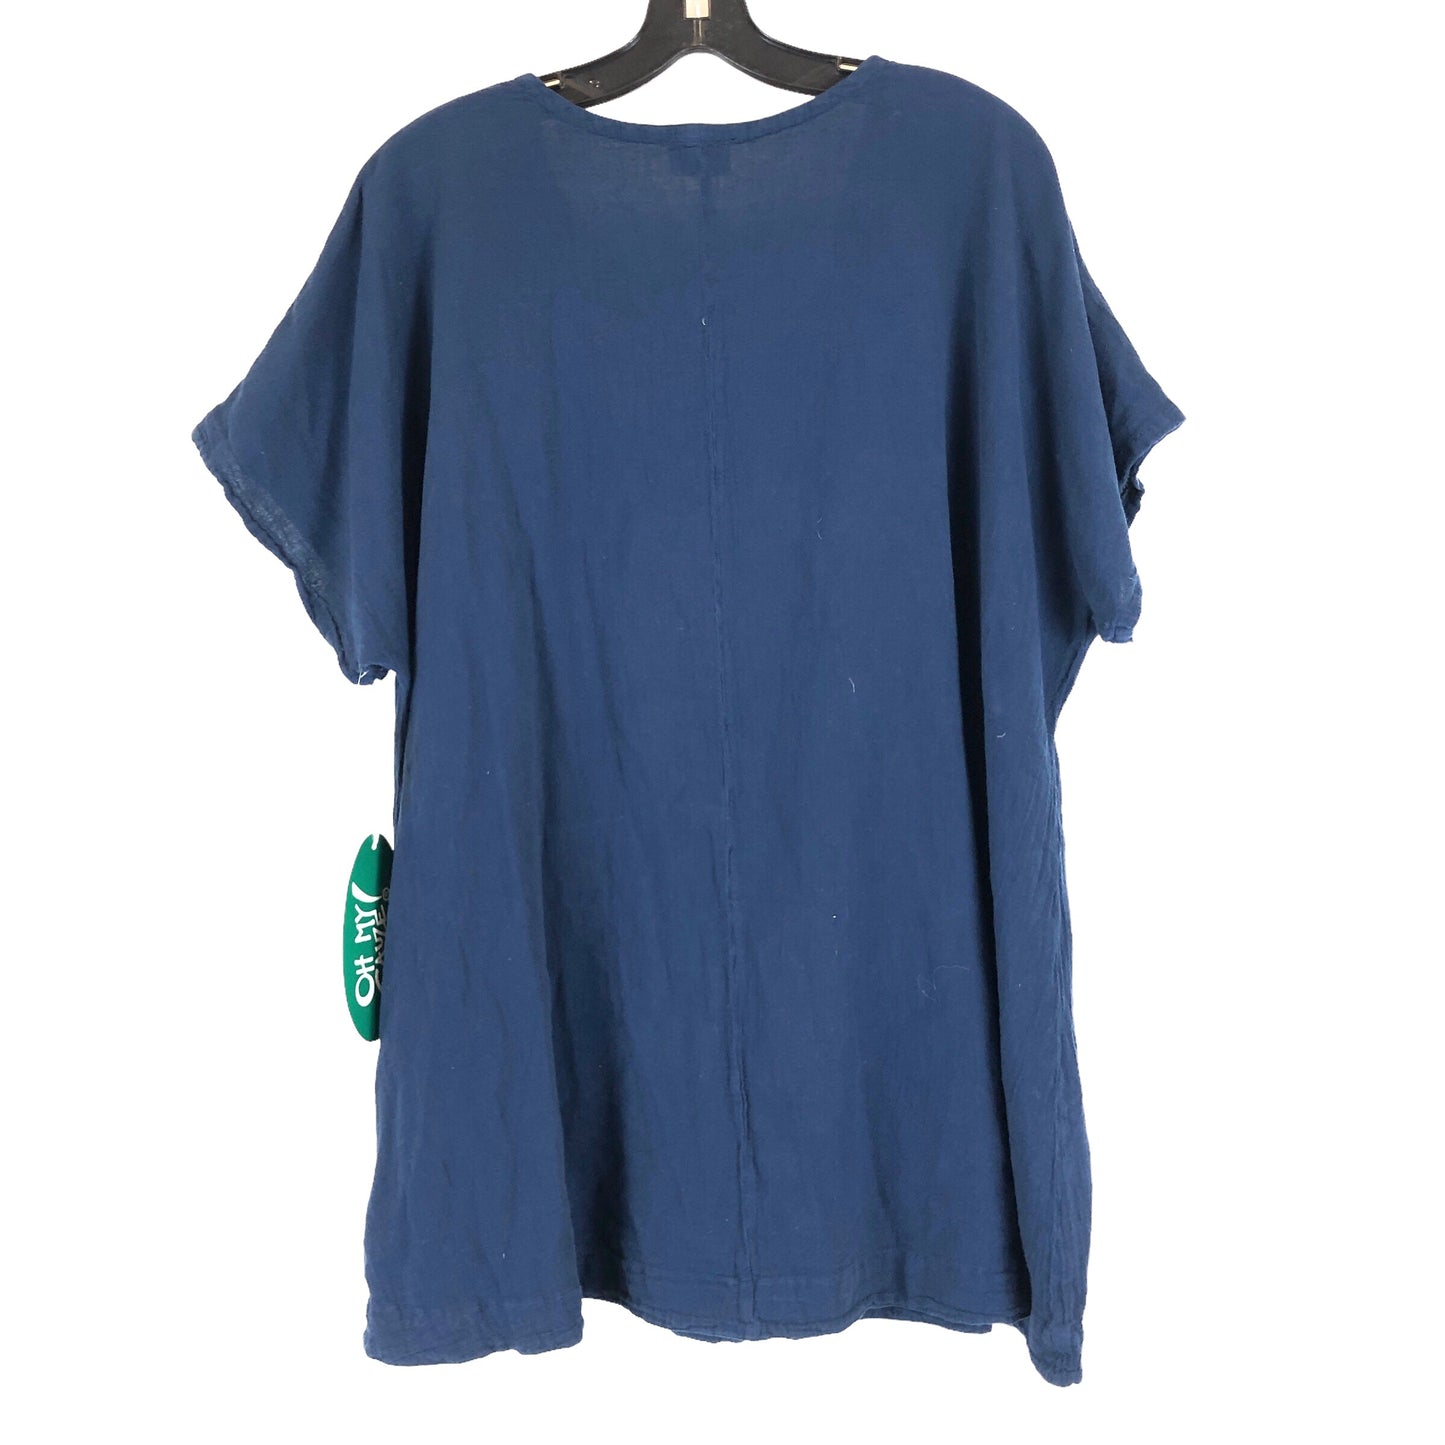 Blue Top Short Sleeve Oh My Gauze, Size L